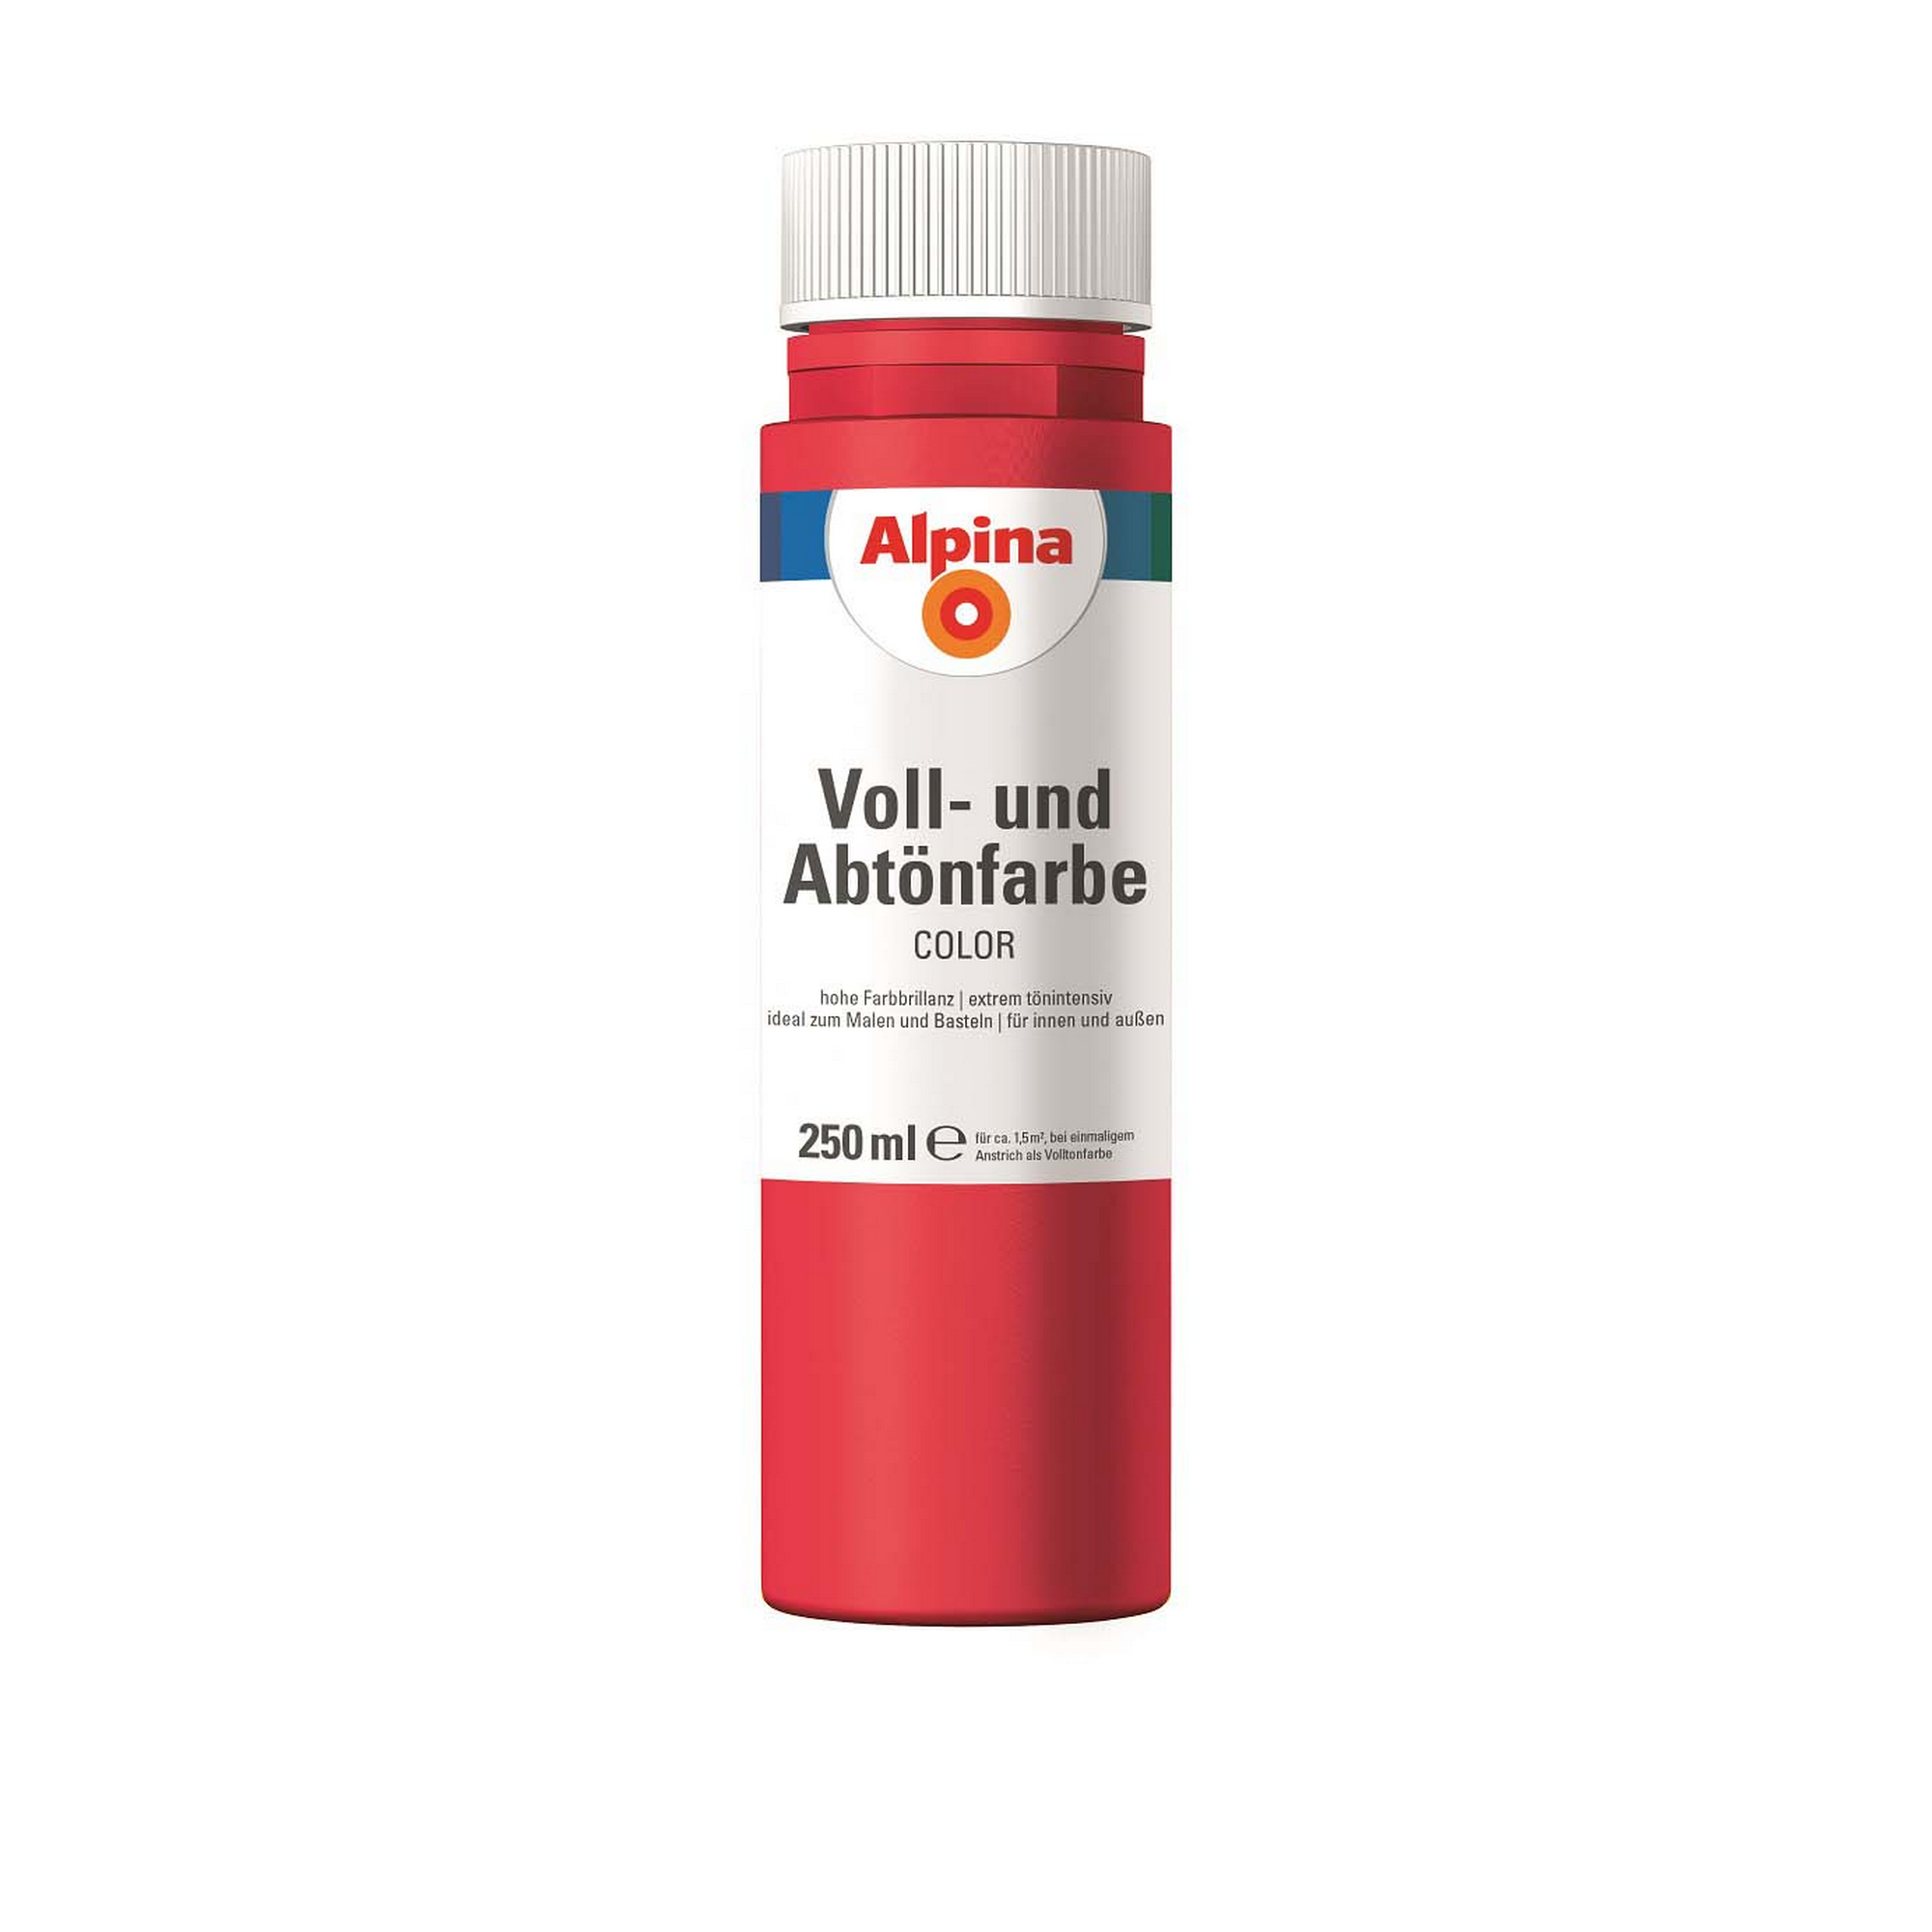 Voll- und Abtönfarbe 'Fire Red' feuerrot 250 ml + product picture